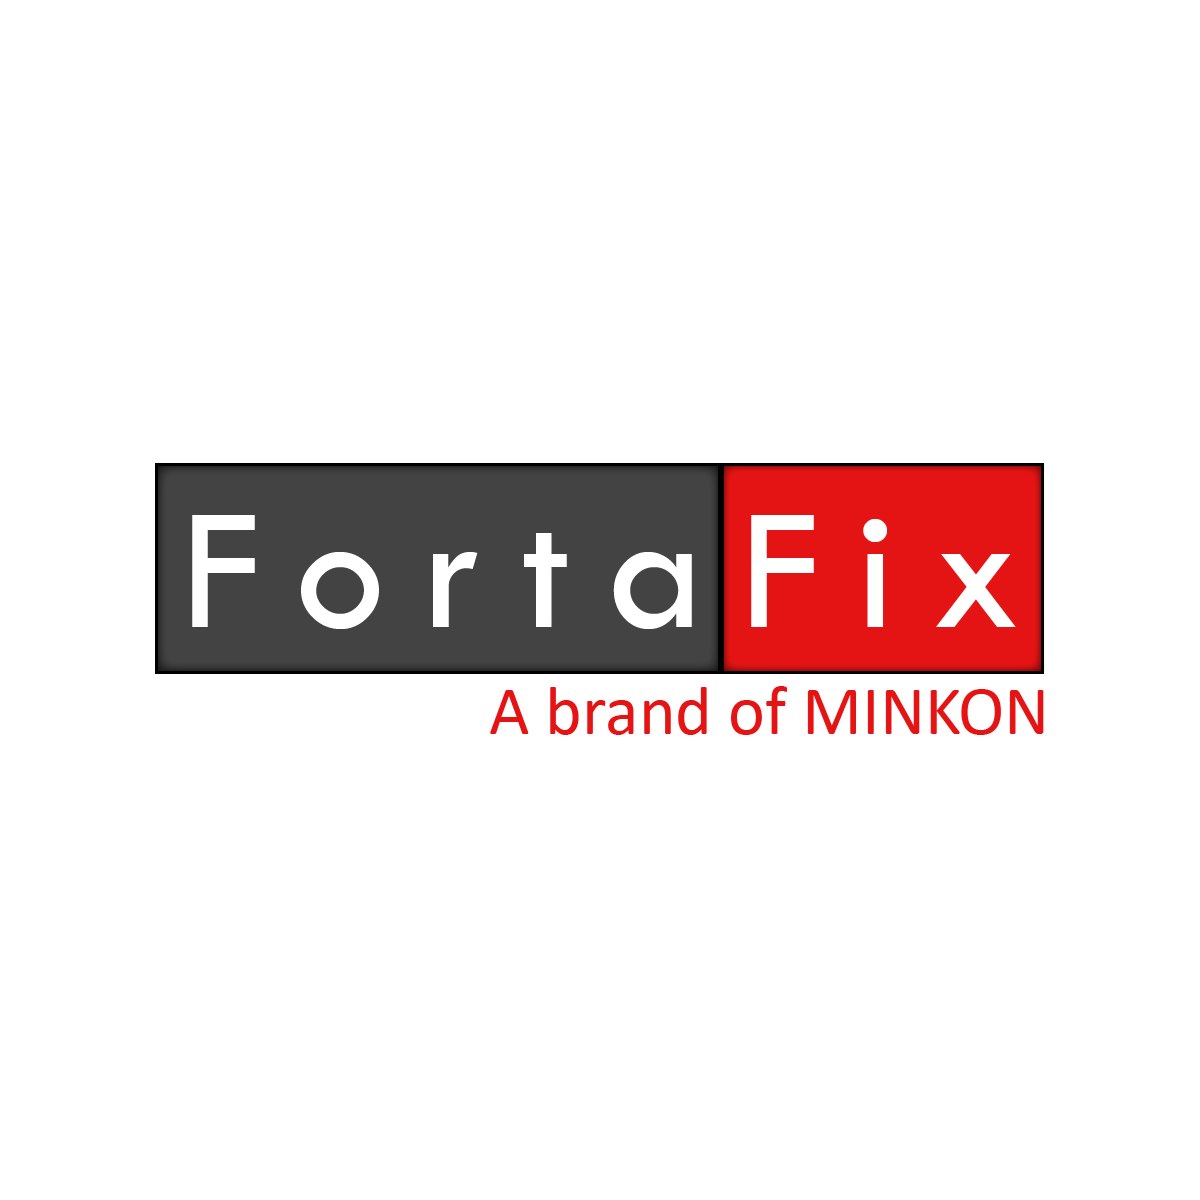 Where to buy Forta Fix